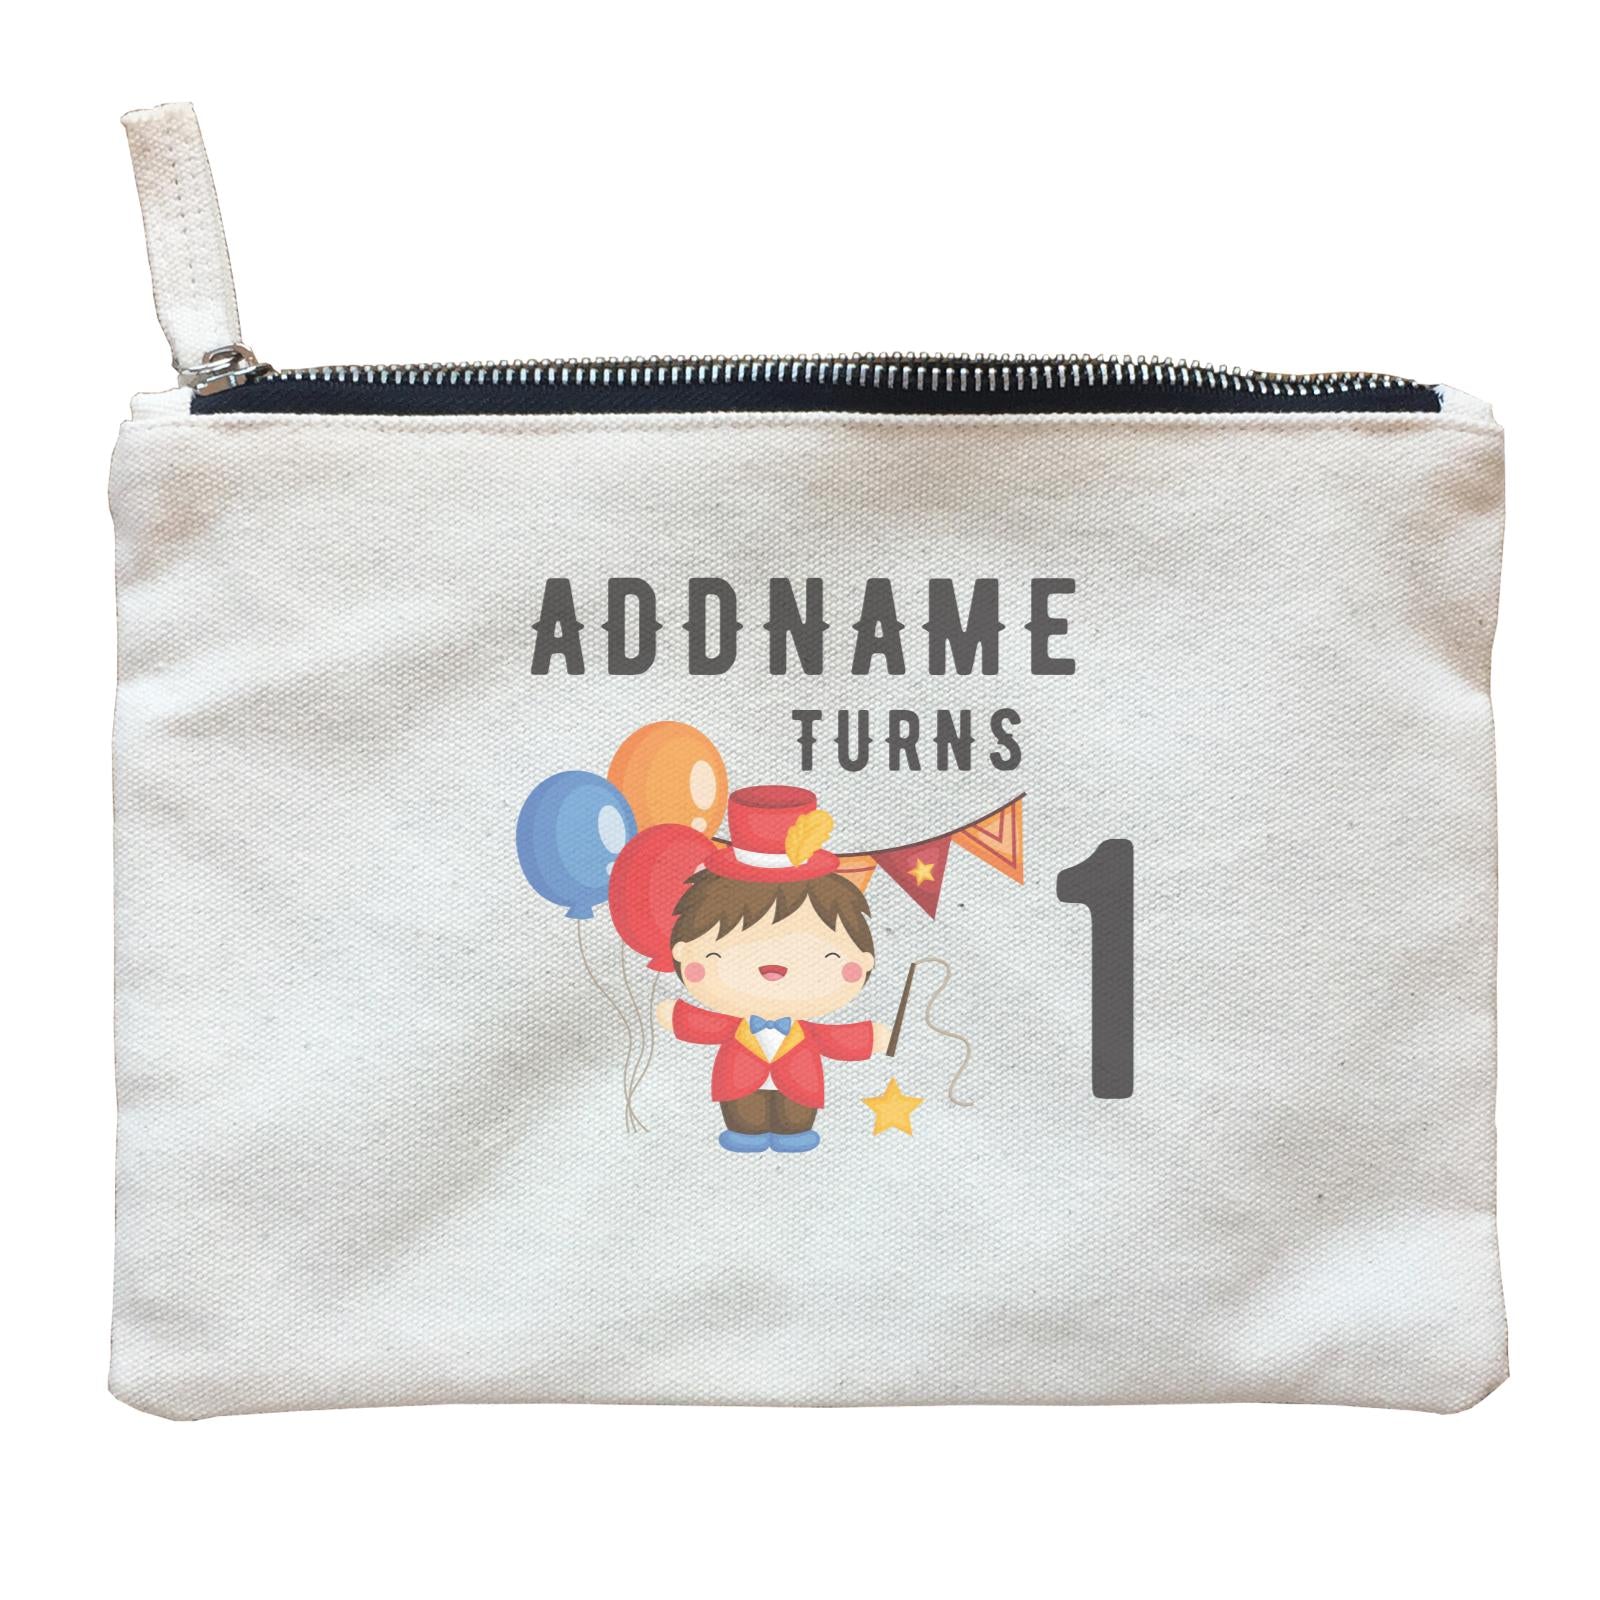 Birthday Circus Happy Boy Leader of Performance Addname Turns 1 Zipper Pouch